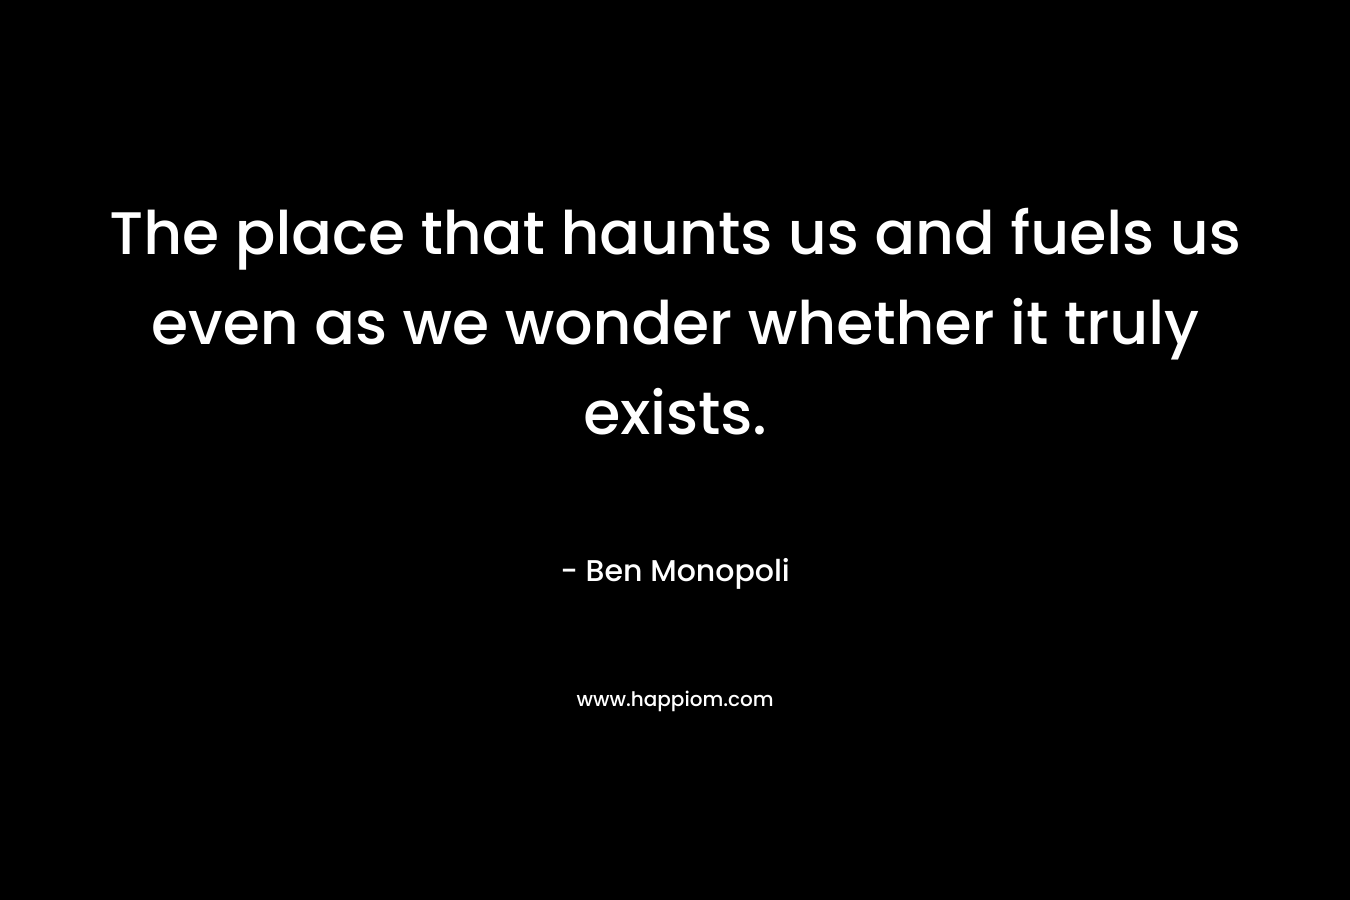 The place that haunts us and fuels us even as we wonder whether it truly exists. – Ben Monopoli